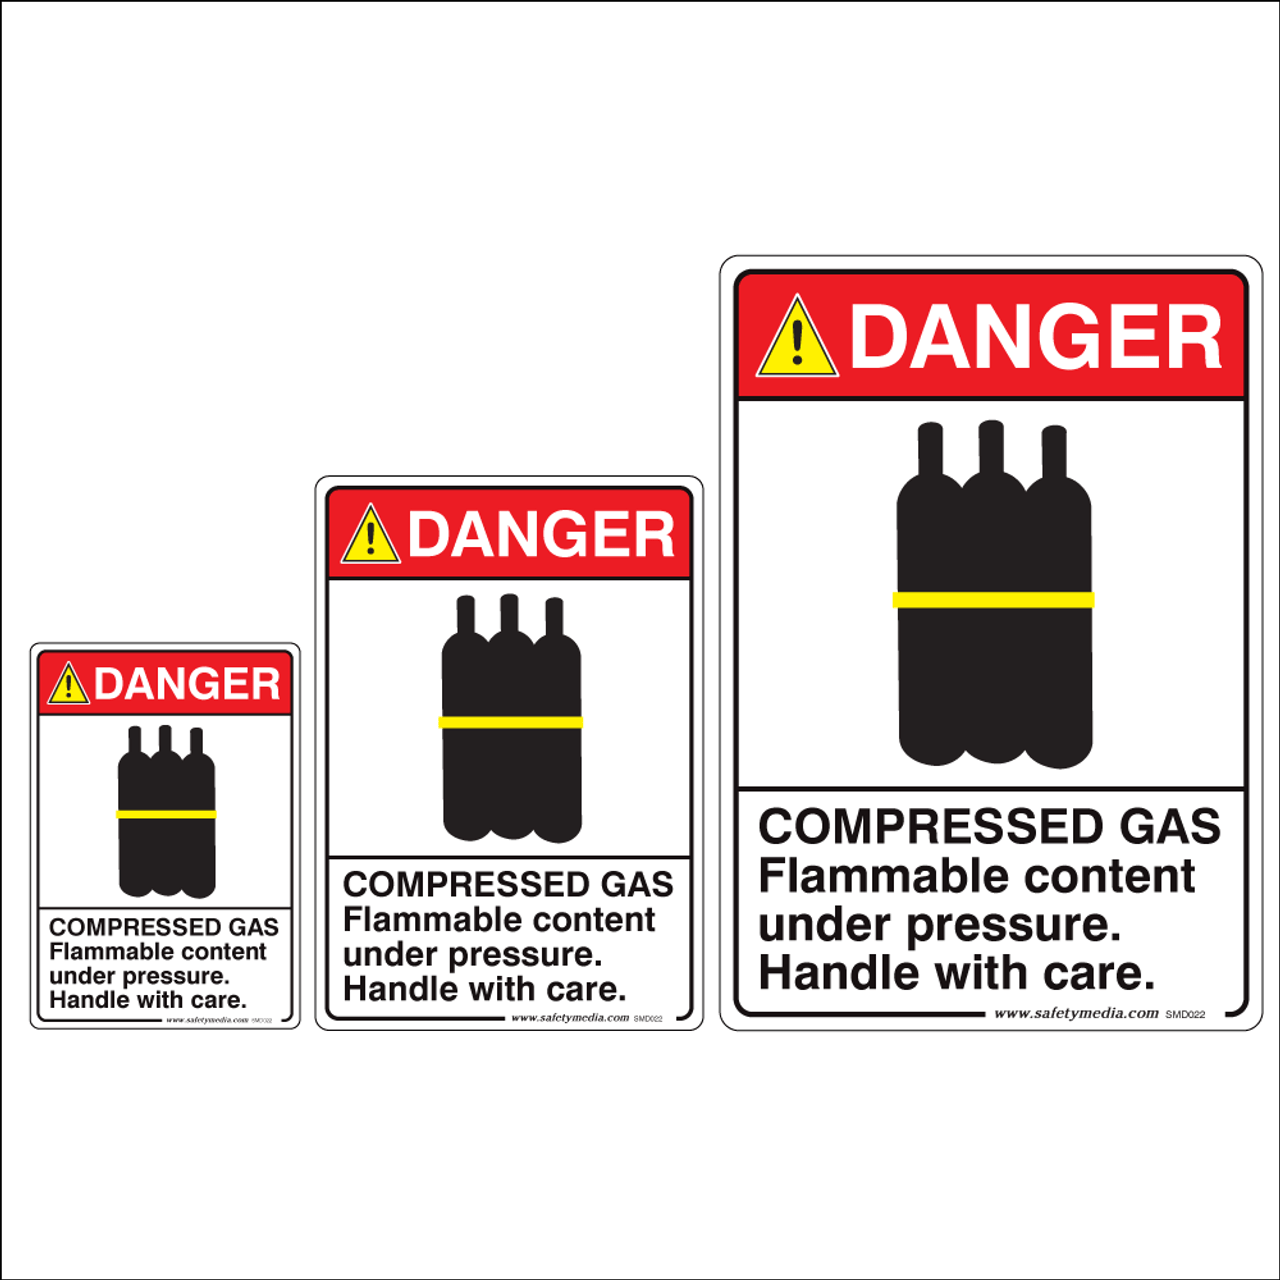 Compressed Gas Flammable Content Handle With Care Danger Signs